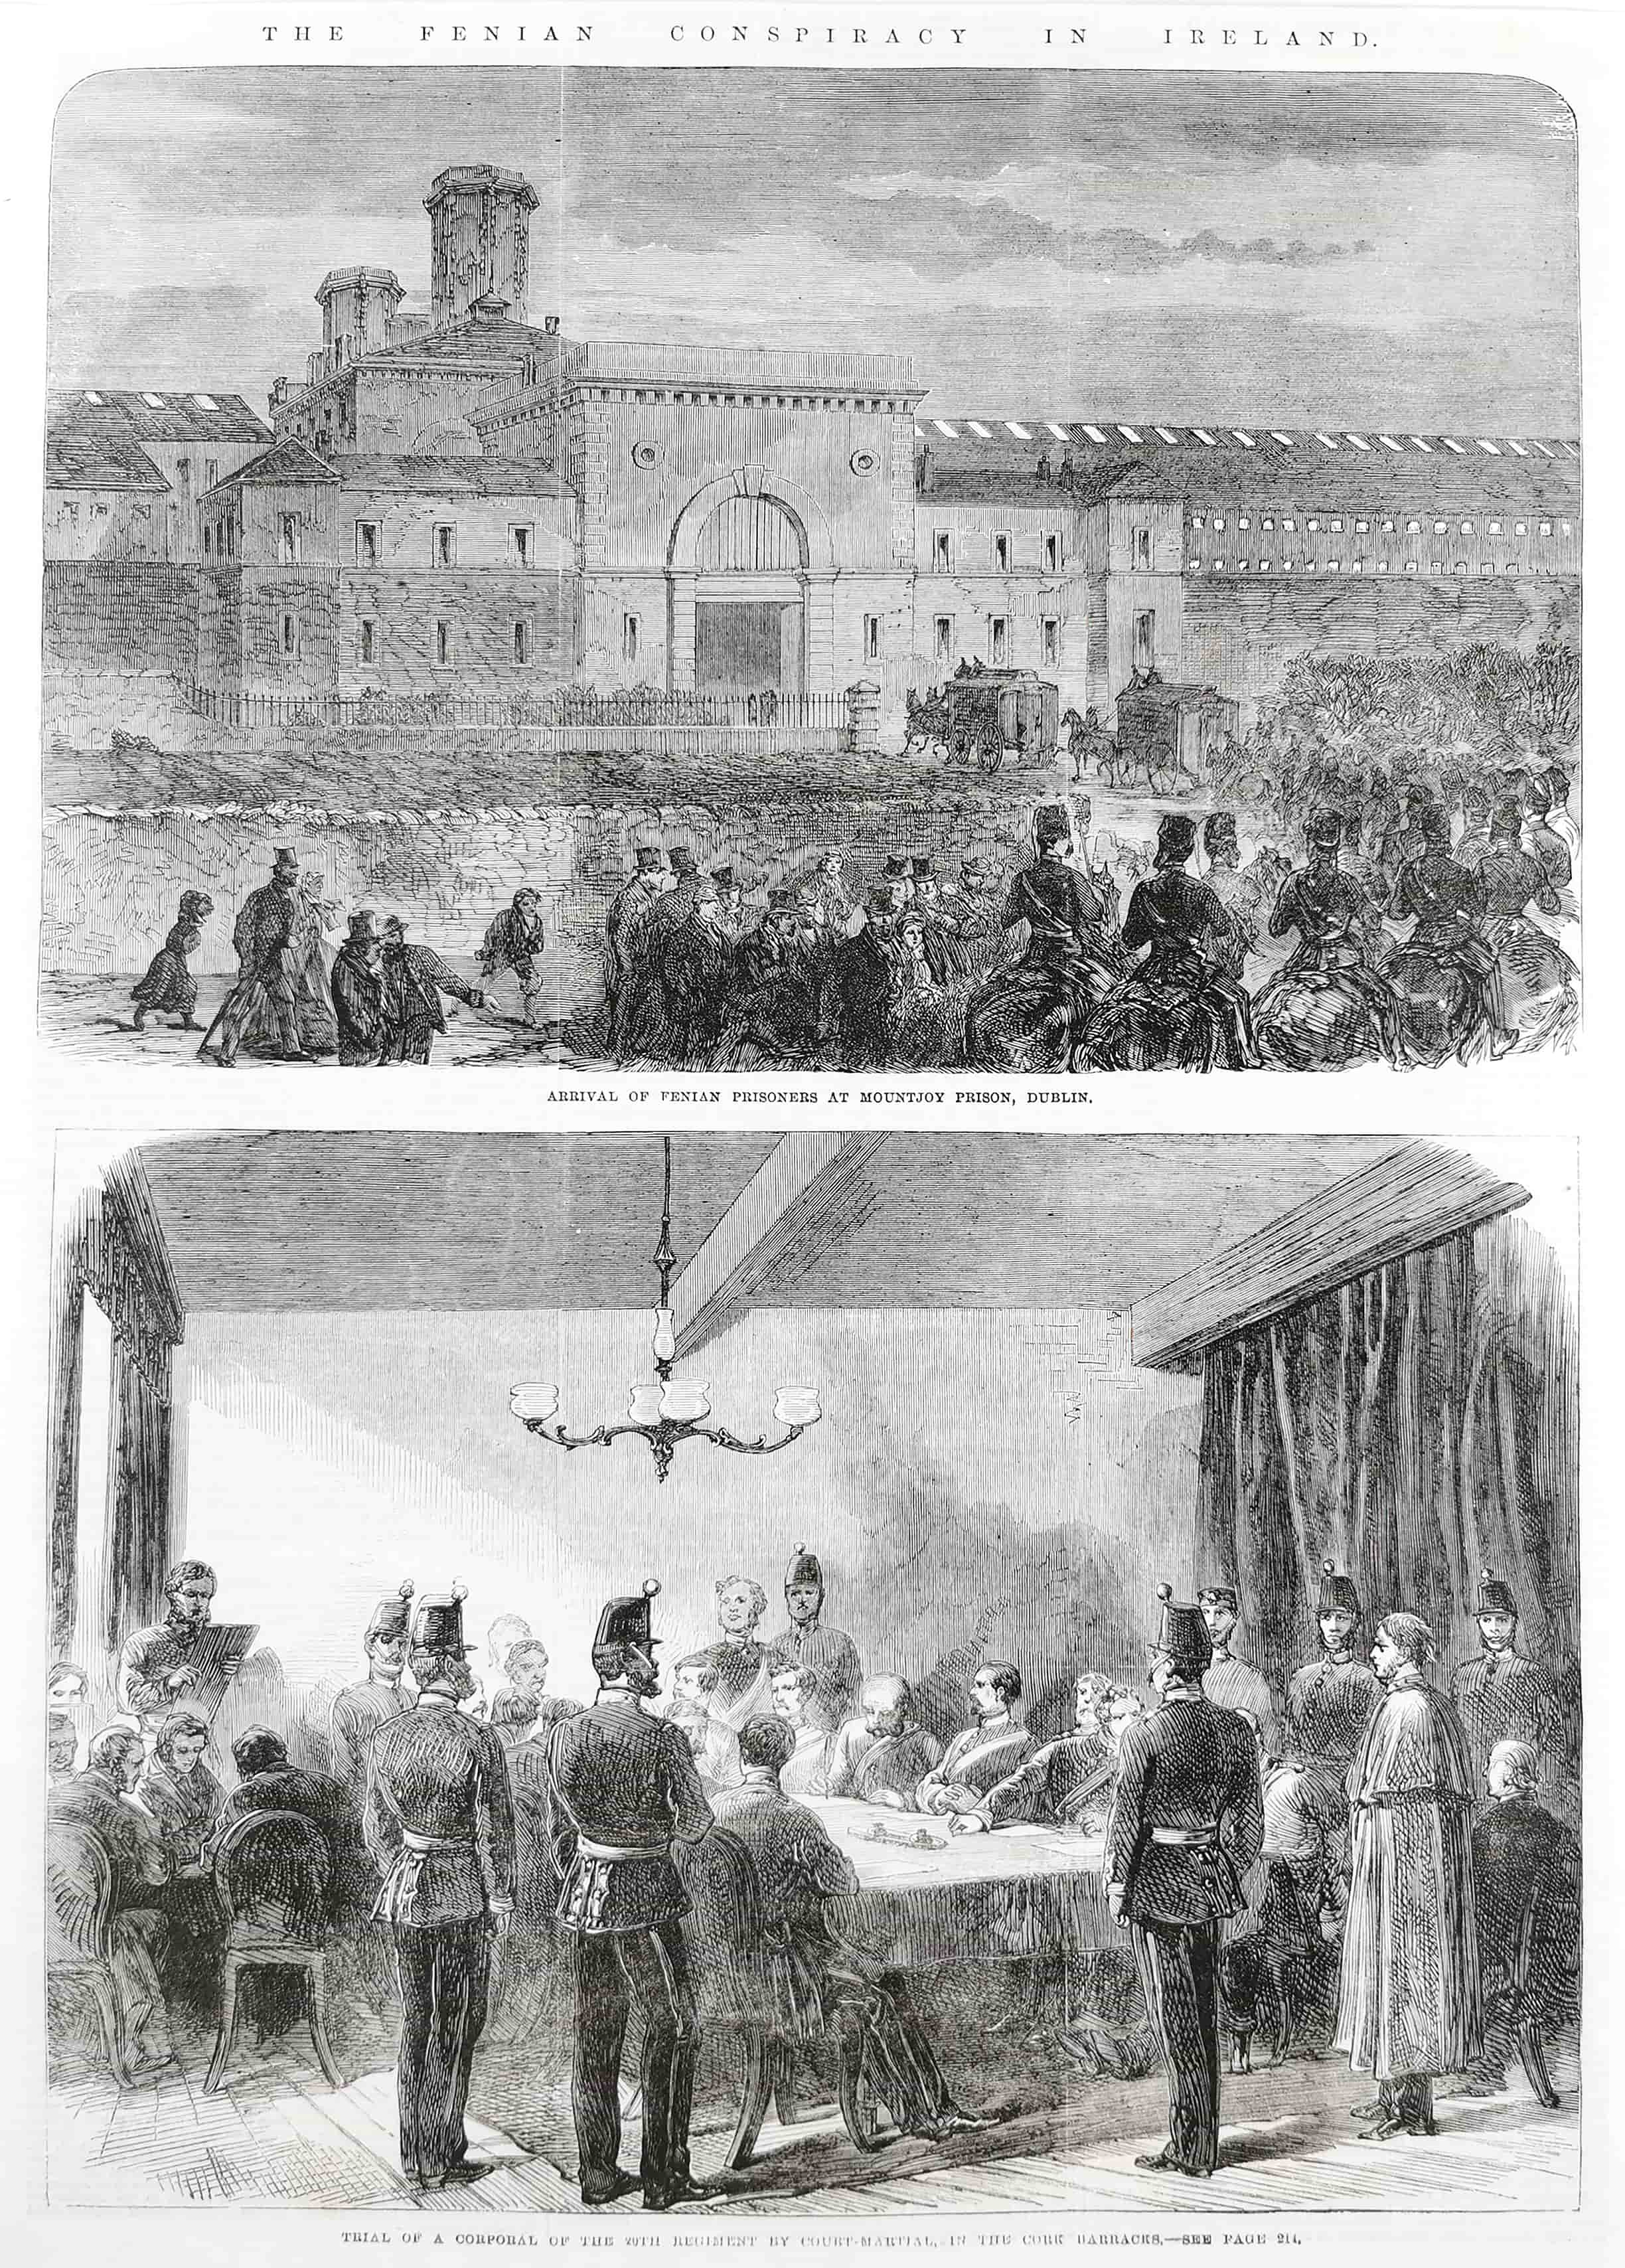 The Fenian Conspiracy in Ireland: Arrival of Fenian prisoners at Mountjoy prison, Dublin - Antique View from 1866